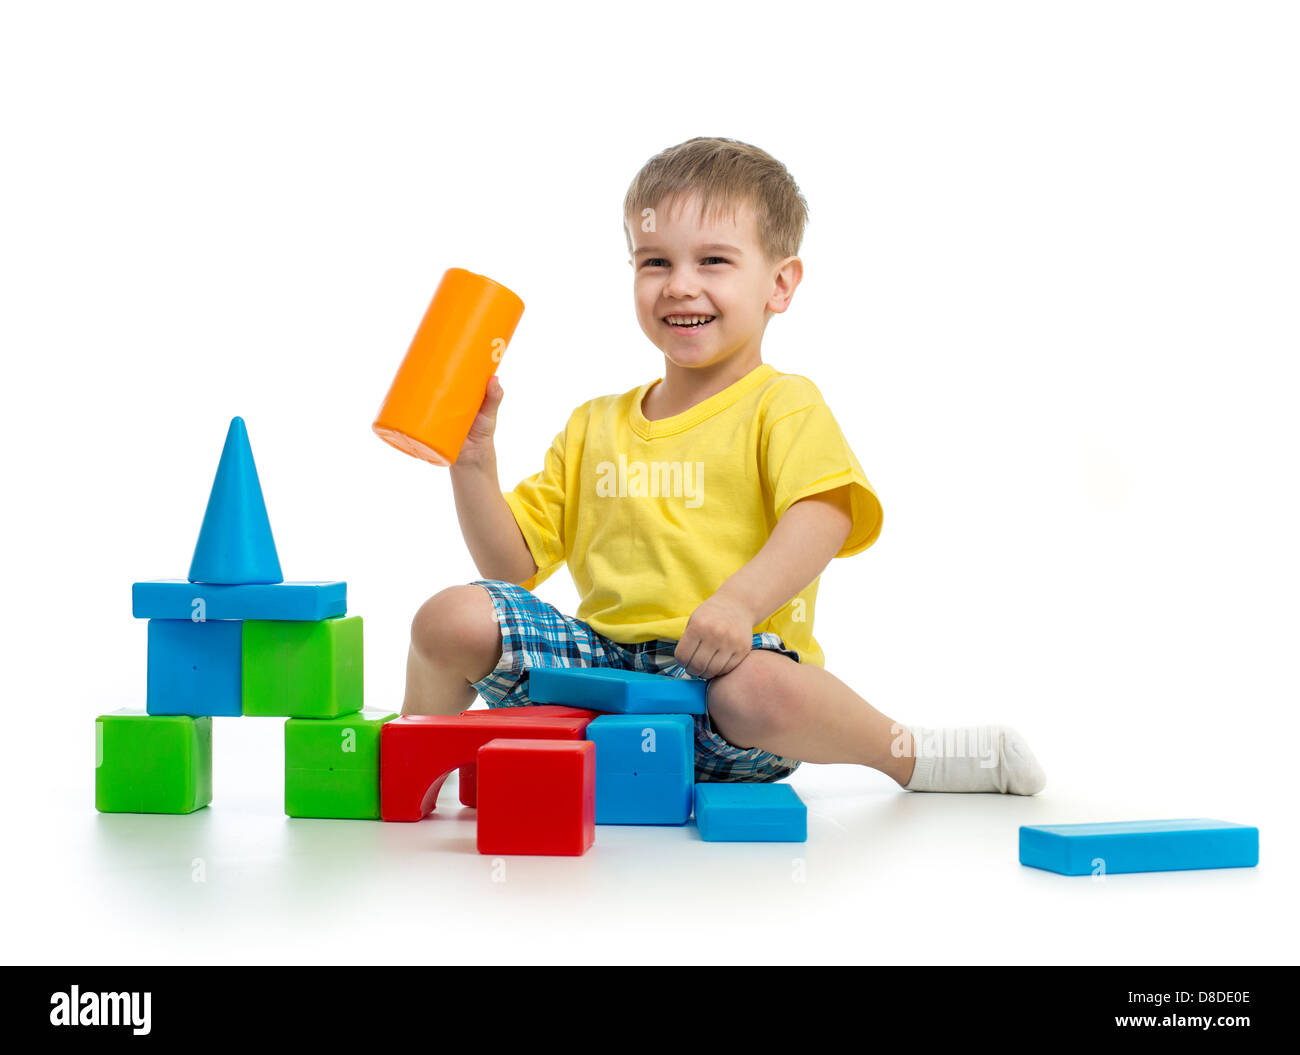 kids playing with building blocks